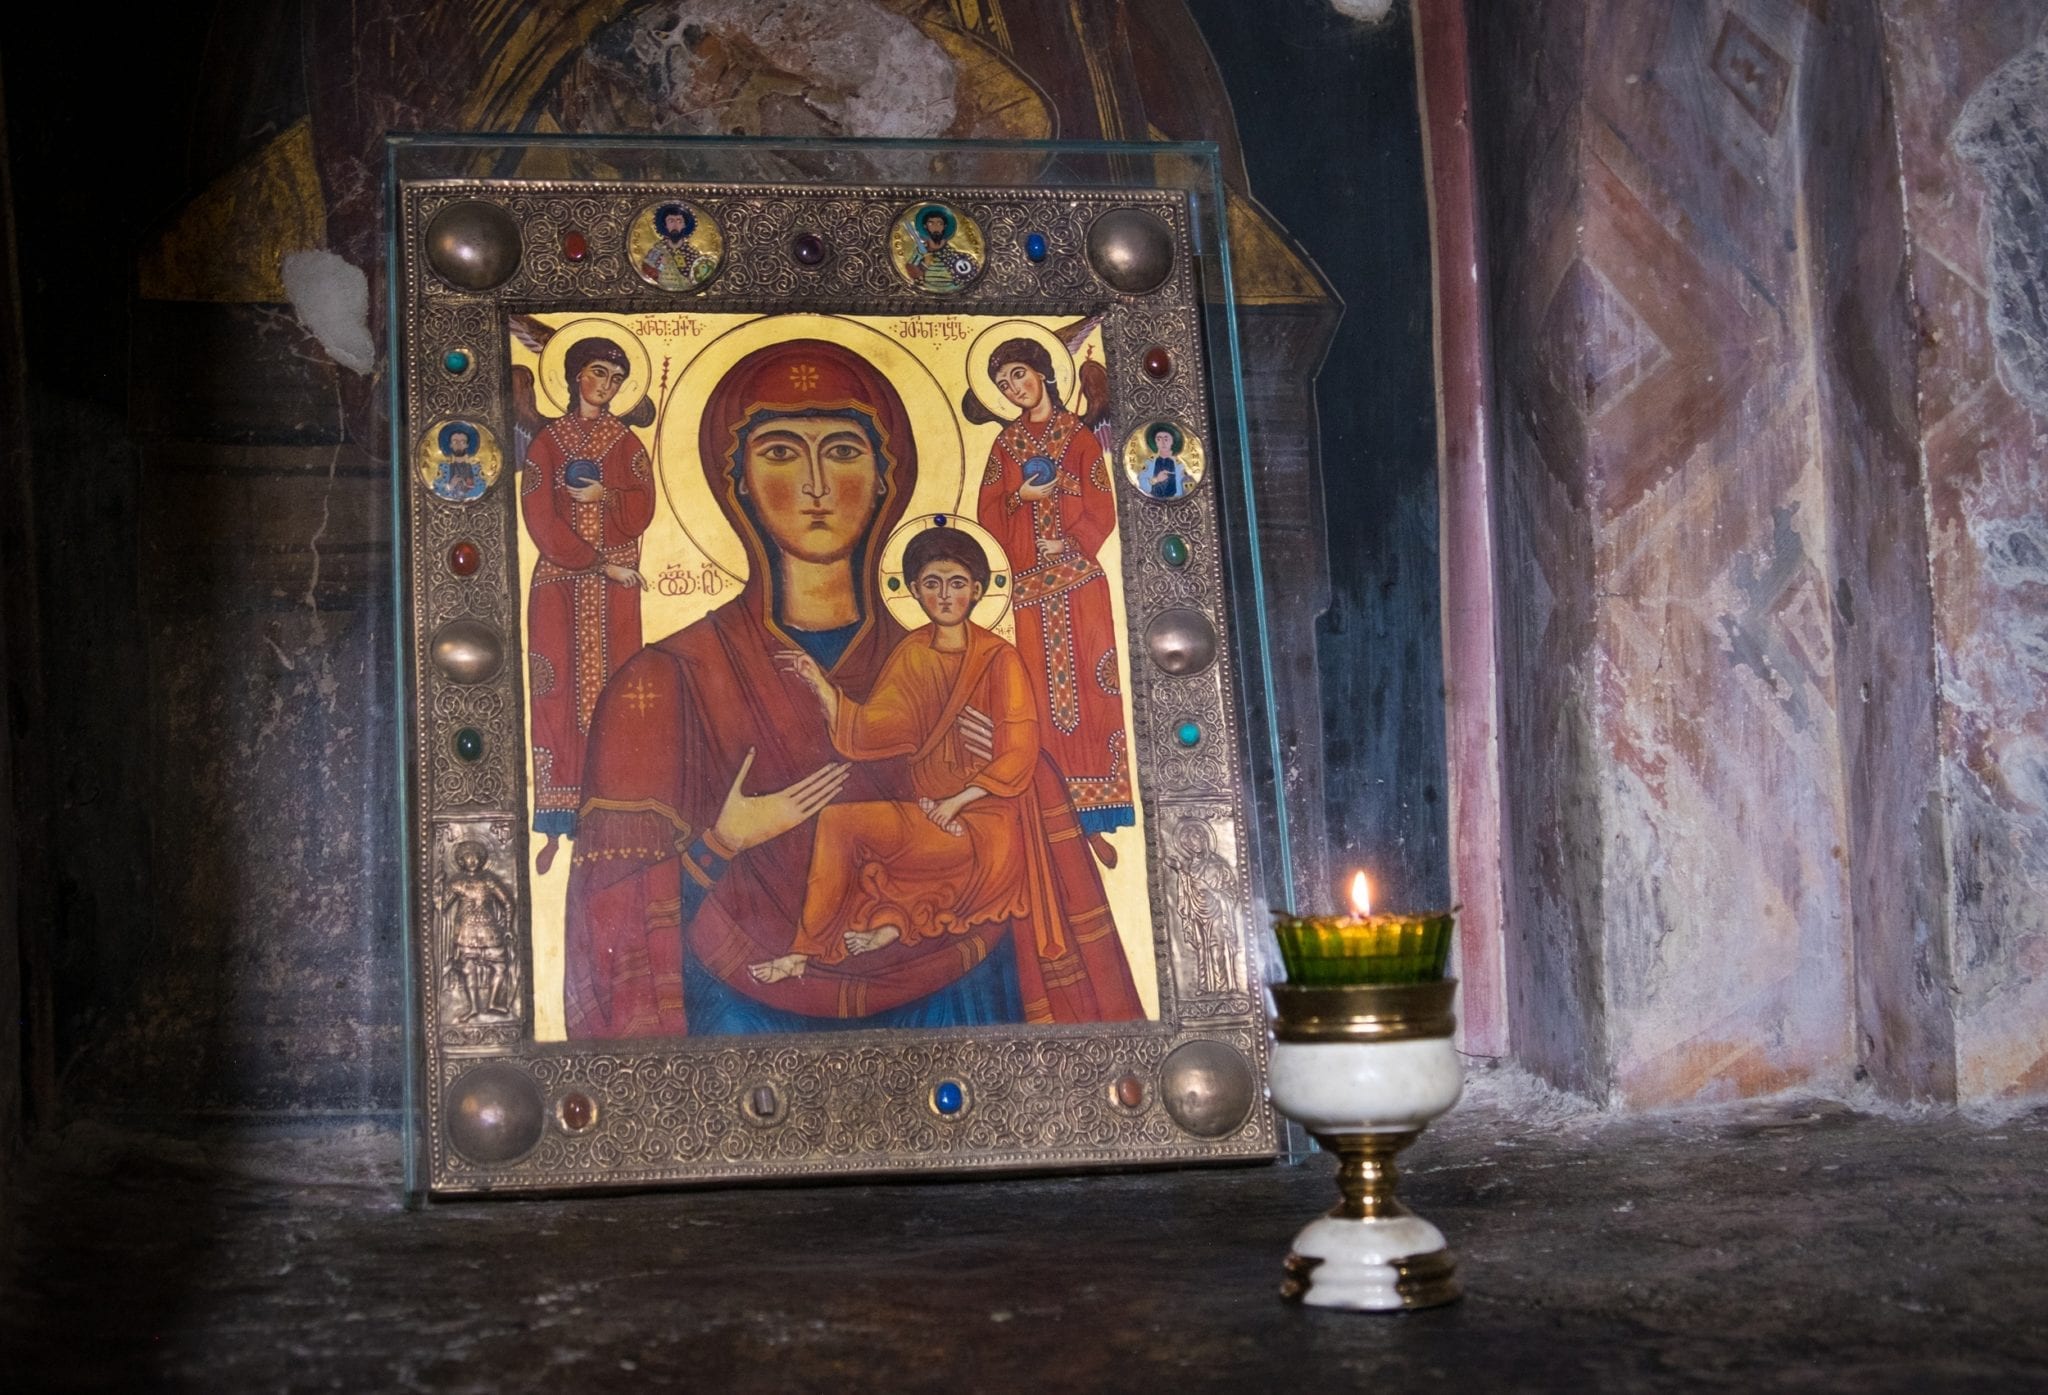 A gold portrait of the Virgin Mary and Jesus leaning against a wall in a Georgian church, a chalice sitting in front.